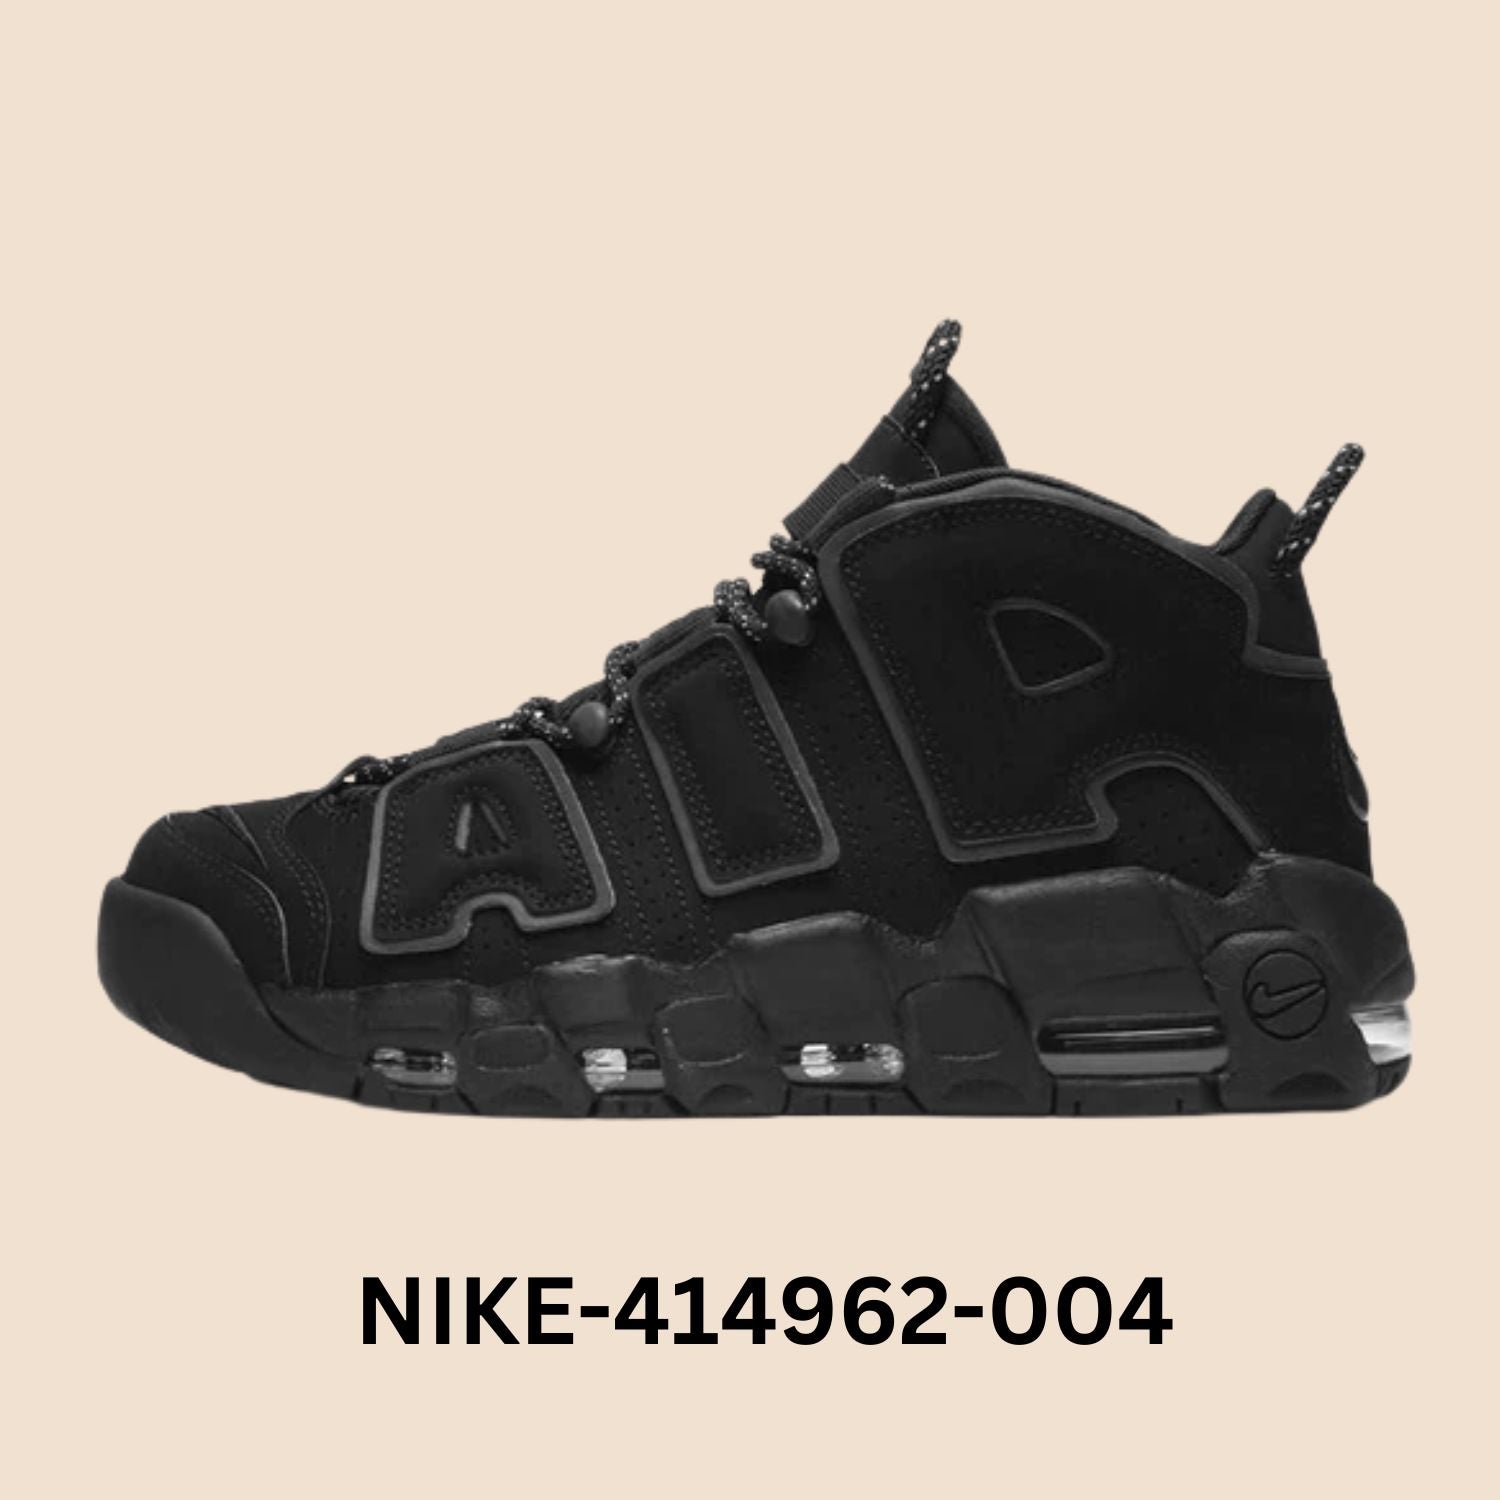 Nike Air More Uptempo "REFLECTIVE" Men's Style# 414962-004